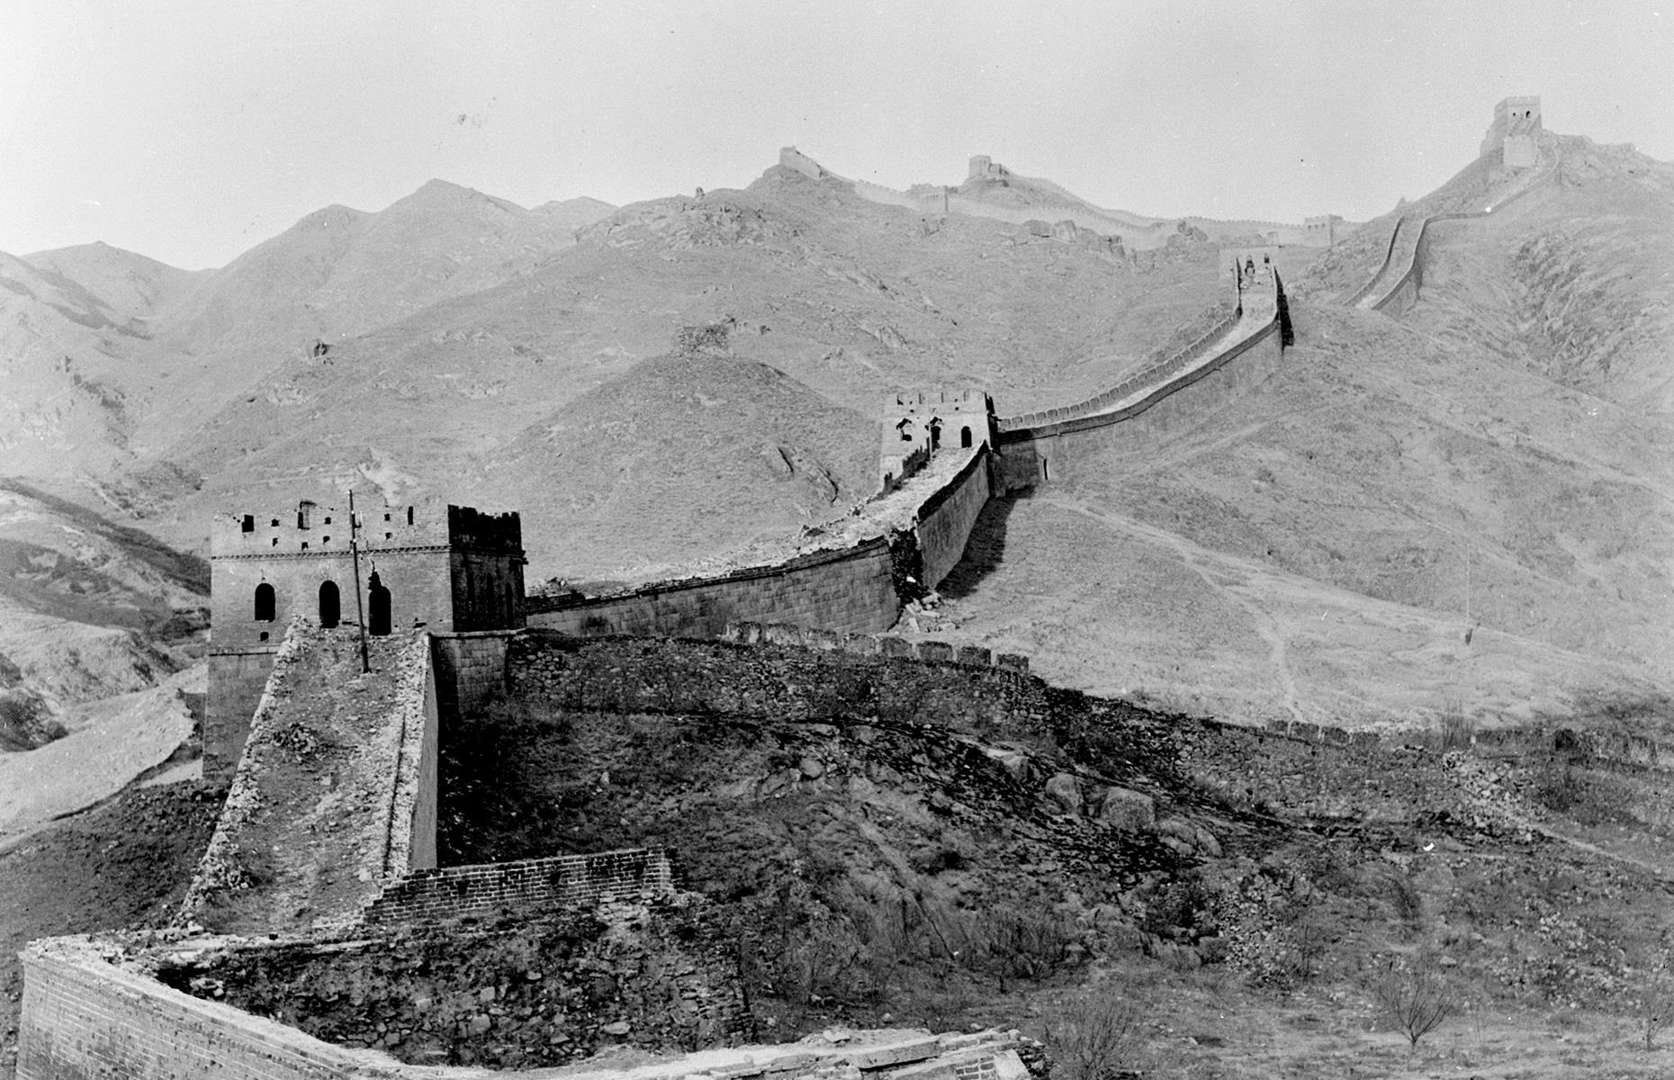 Slide 40 of 41: The scale of China's Great Wall is immense: it wriggles out for around 13,171 miles (21,197km) according to the most recent estimates and is punctured by hulking watch towers. While the wall's roots go as far back as the 7th century BC, the best-preserved sections (one of which is pictured here) date to the Ming Dynasty (from the 14th to the 17th centuries). The most touristed segment, at Badaling, was also restored in the 1950s, the same decade that this photo was captured.